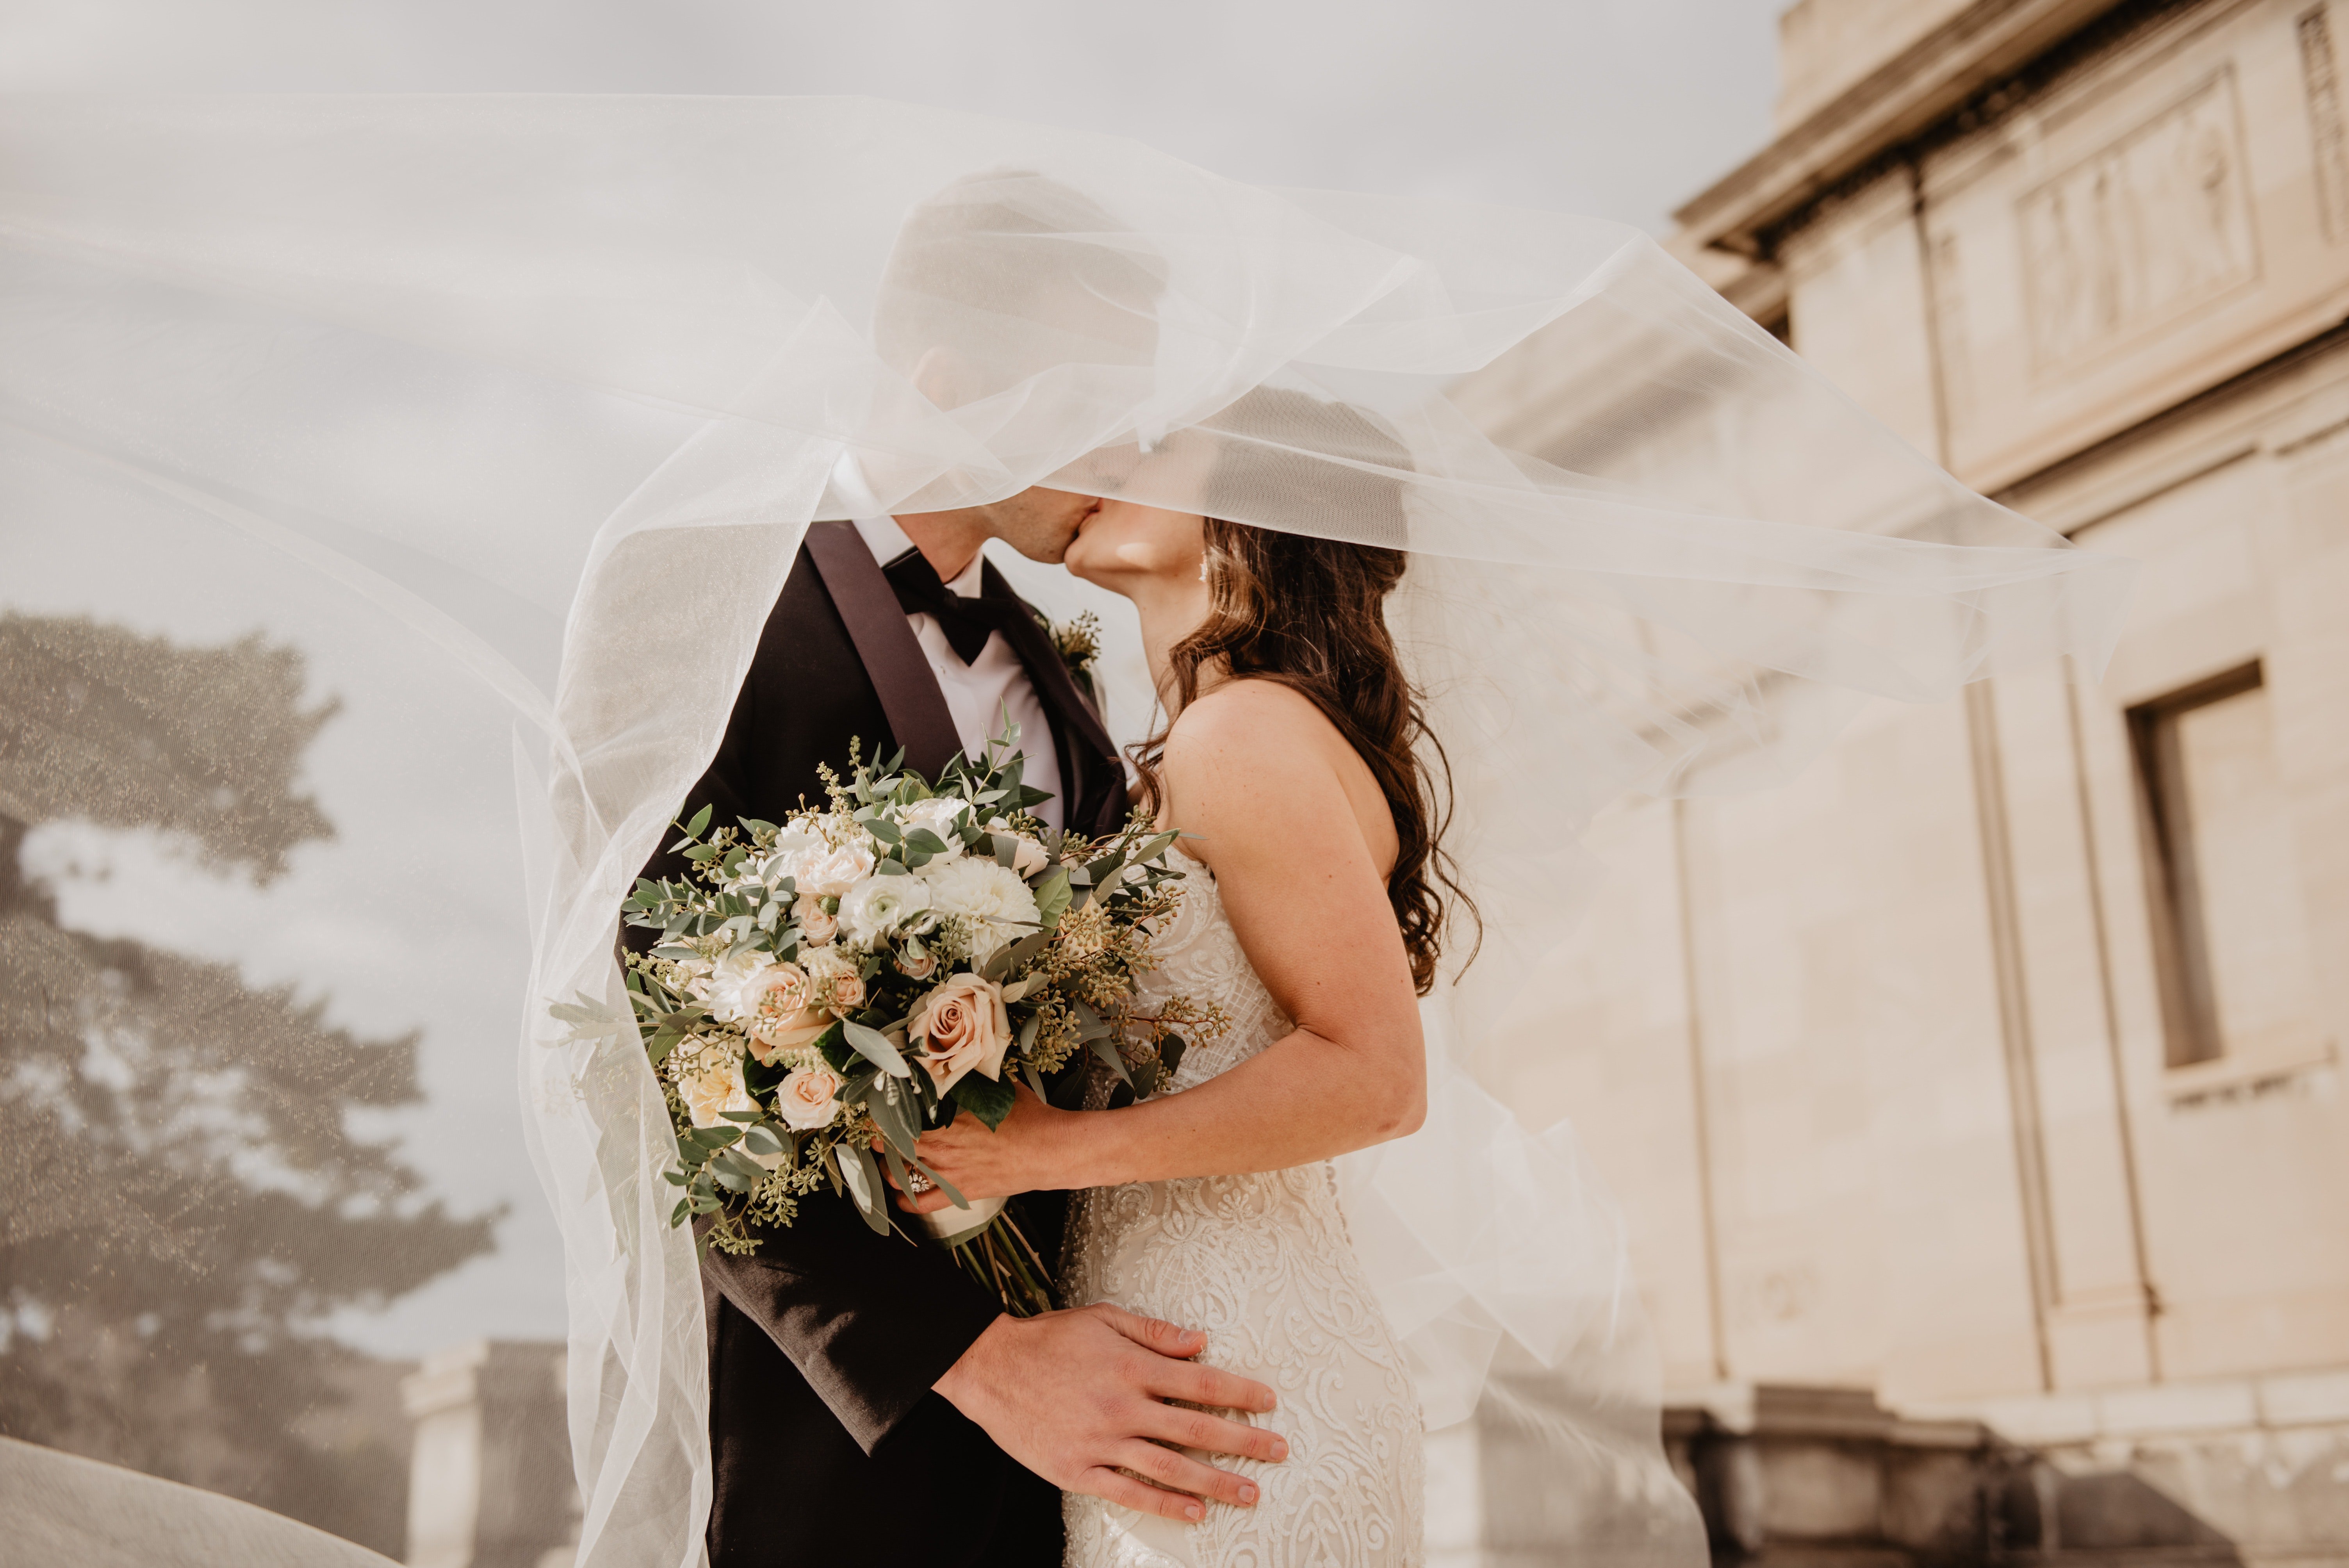 The wedding proceeded without a hitch, and Kelly Johnson became Kelly Sanders–Johnson in honor of her loving father  | Source: Pexels